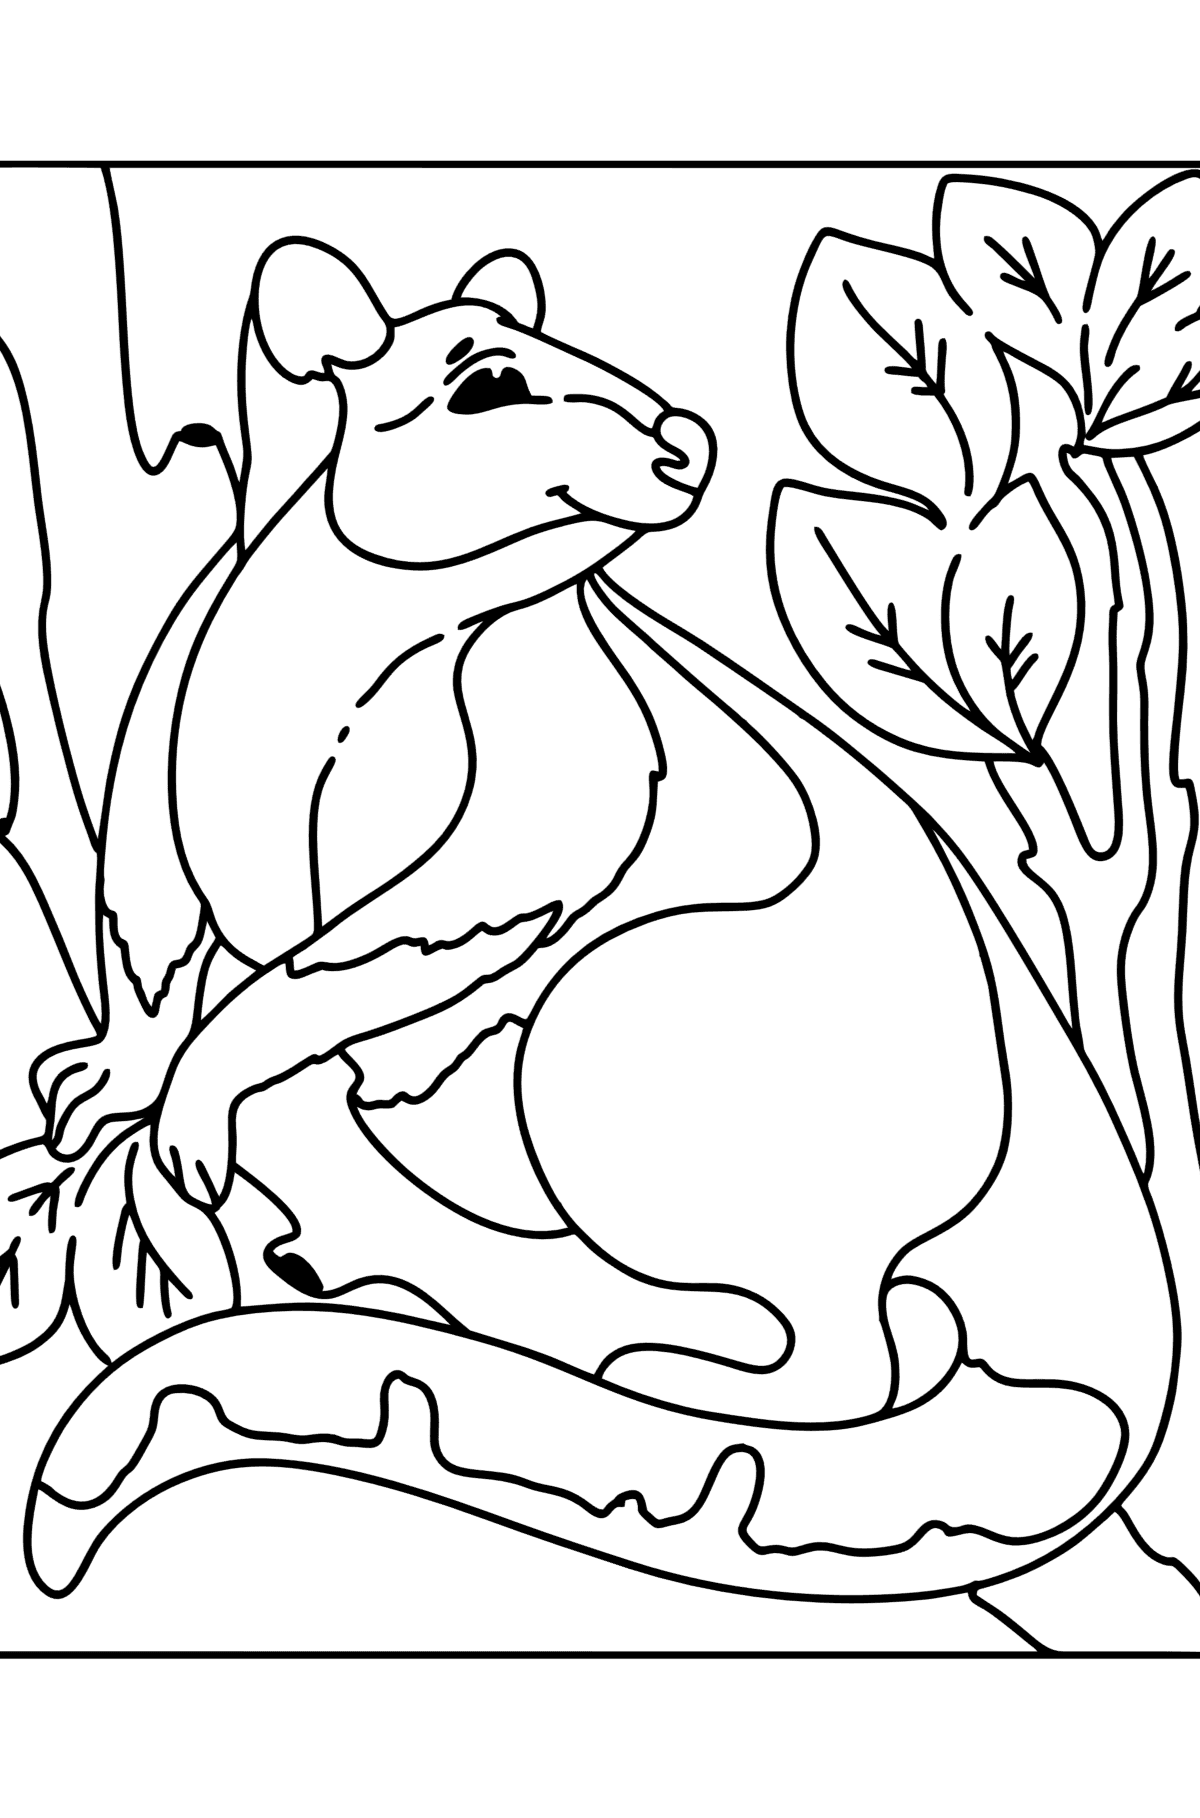 Coloring page - Tree Kangaroo - Coloring Pages for Kids